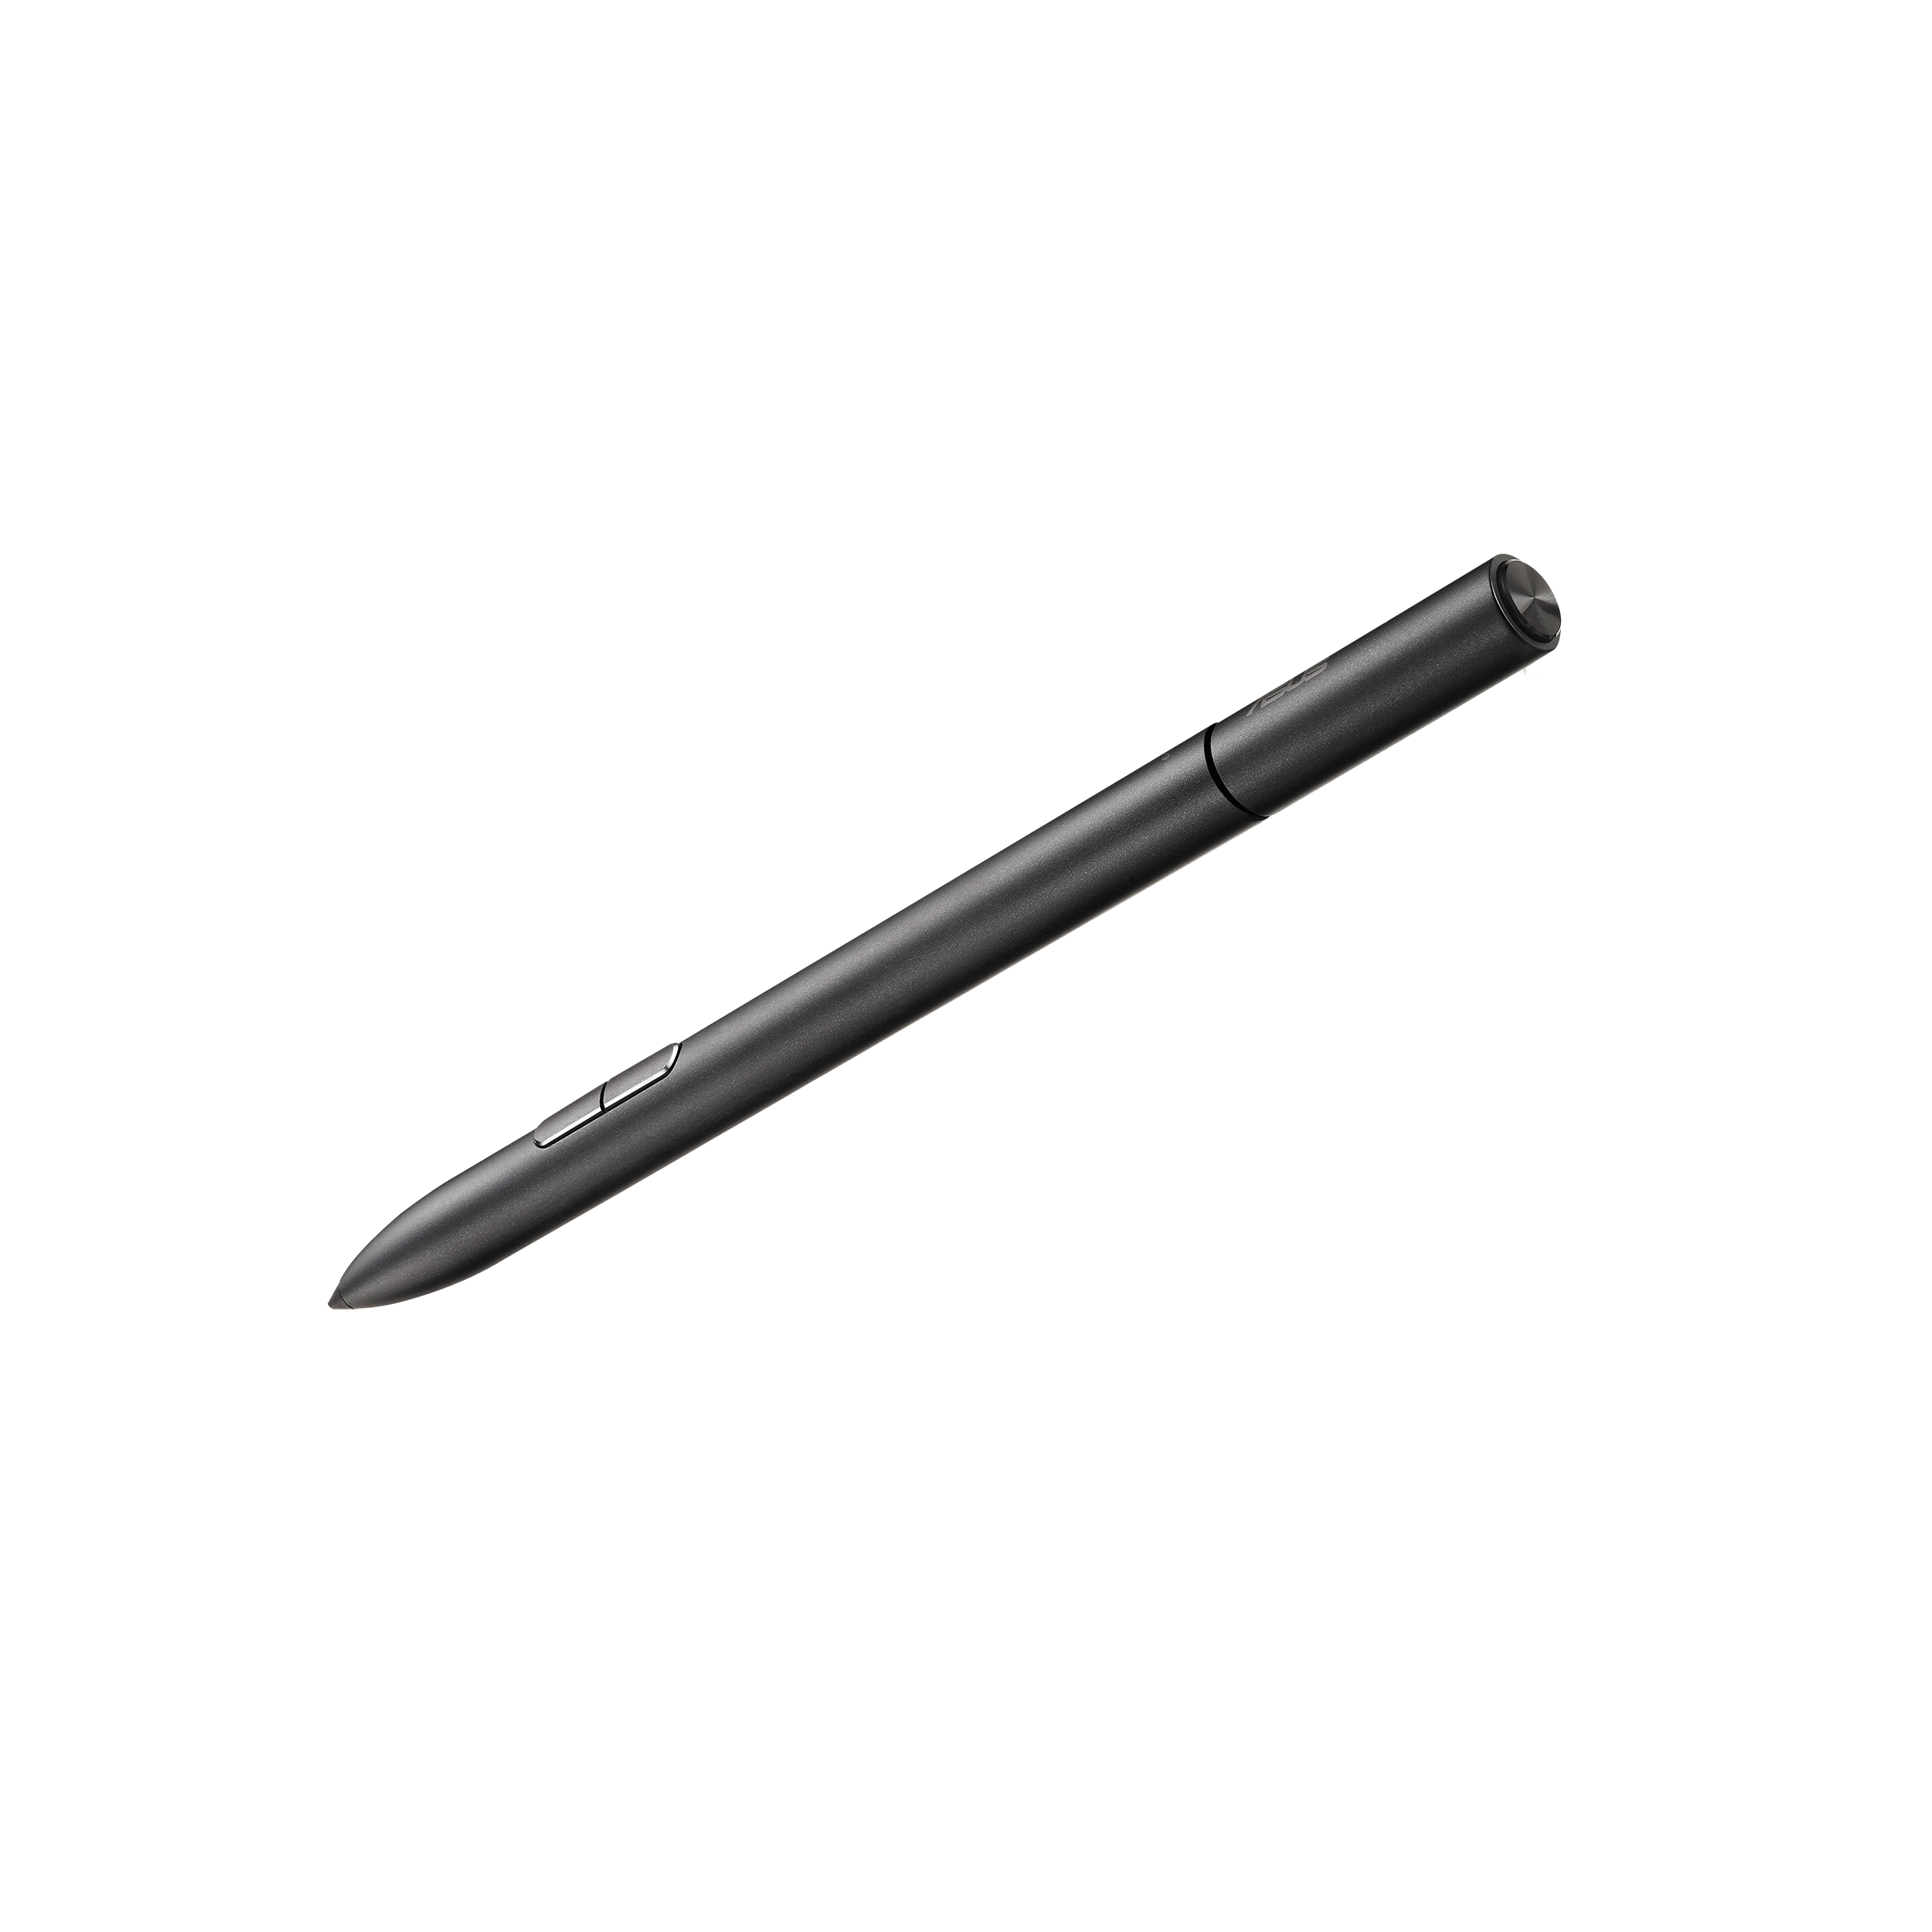 Stylus Pen For Touch Screen Laptop and Supplies Accessories